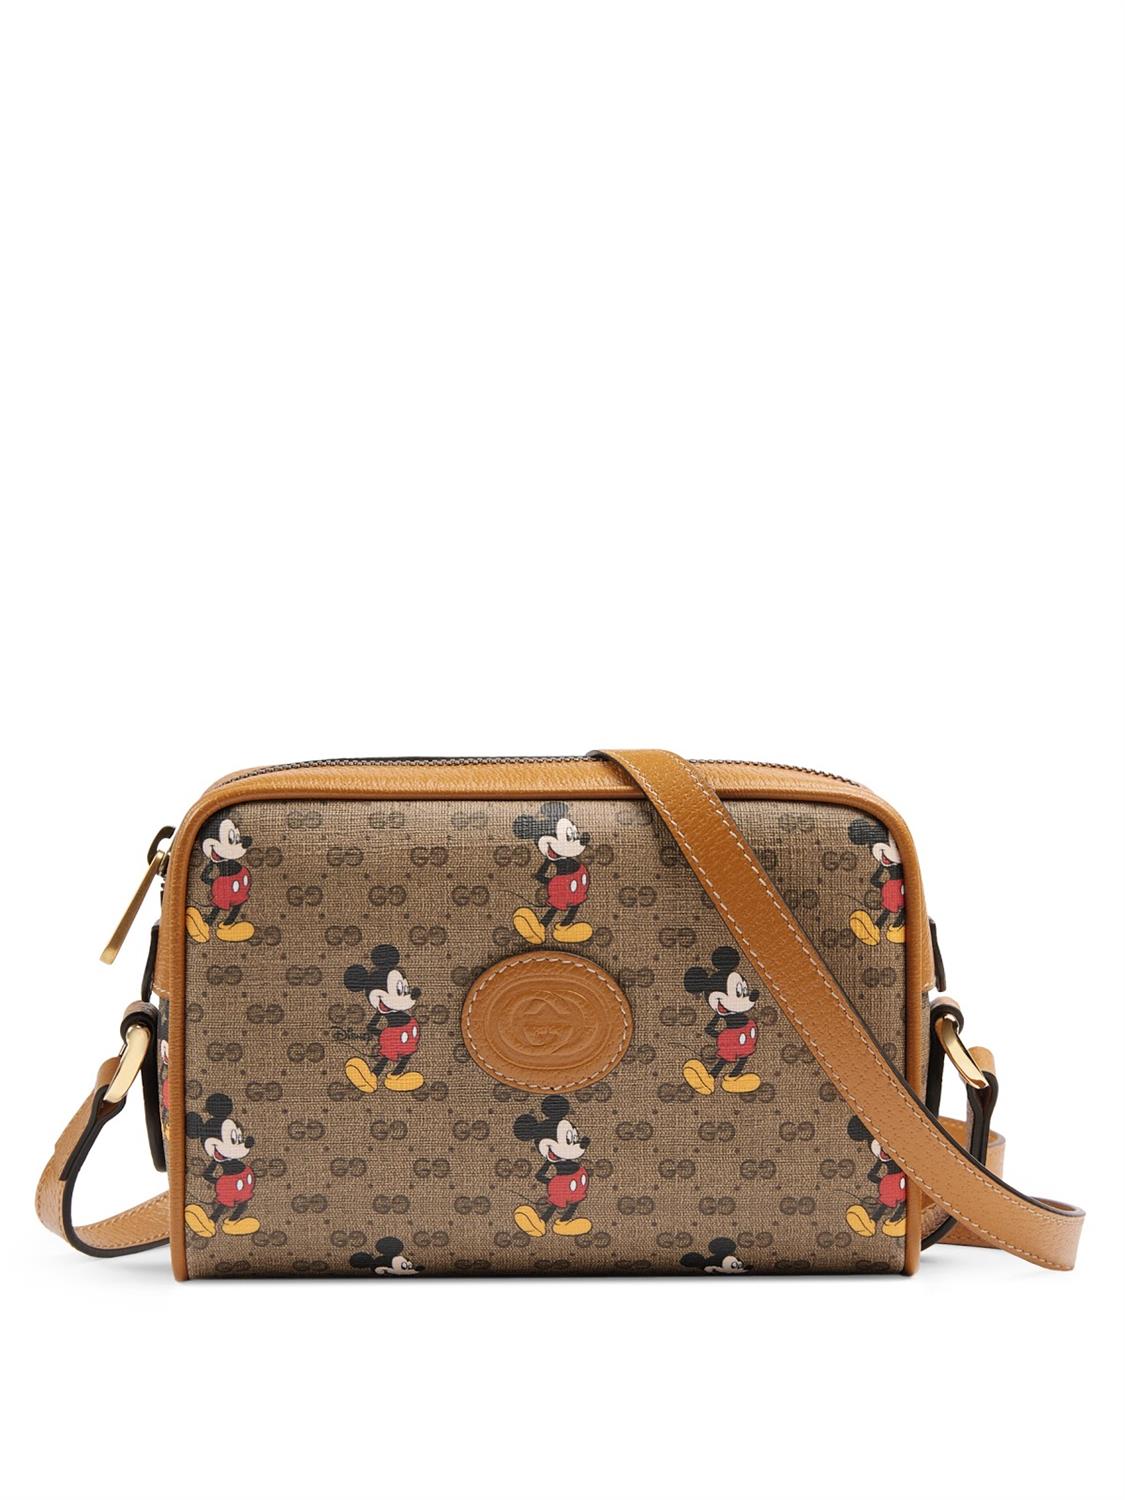 Gucci Mickey Mouse Bag | Paul Smith